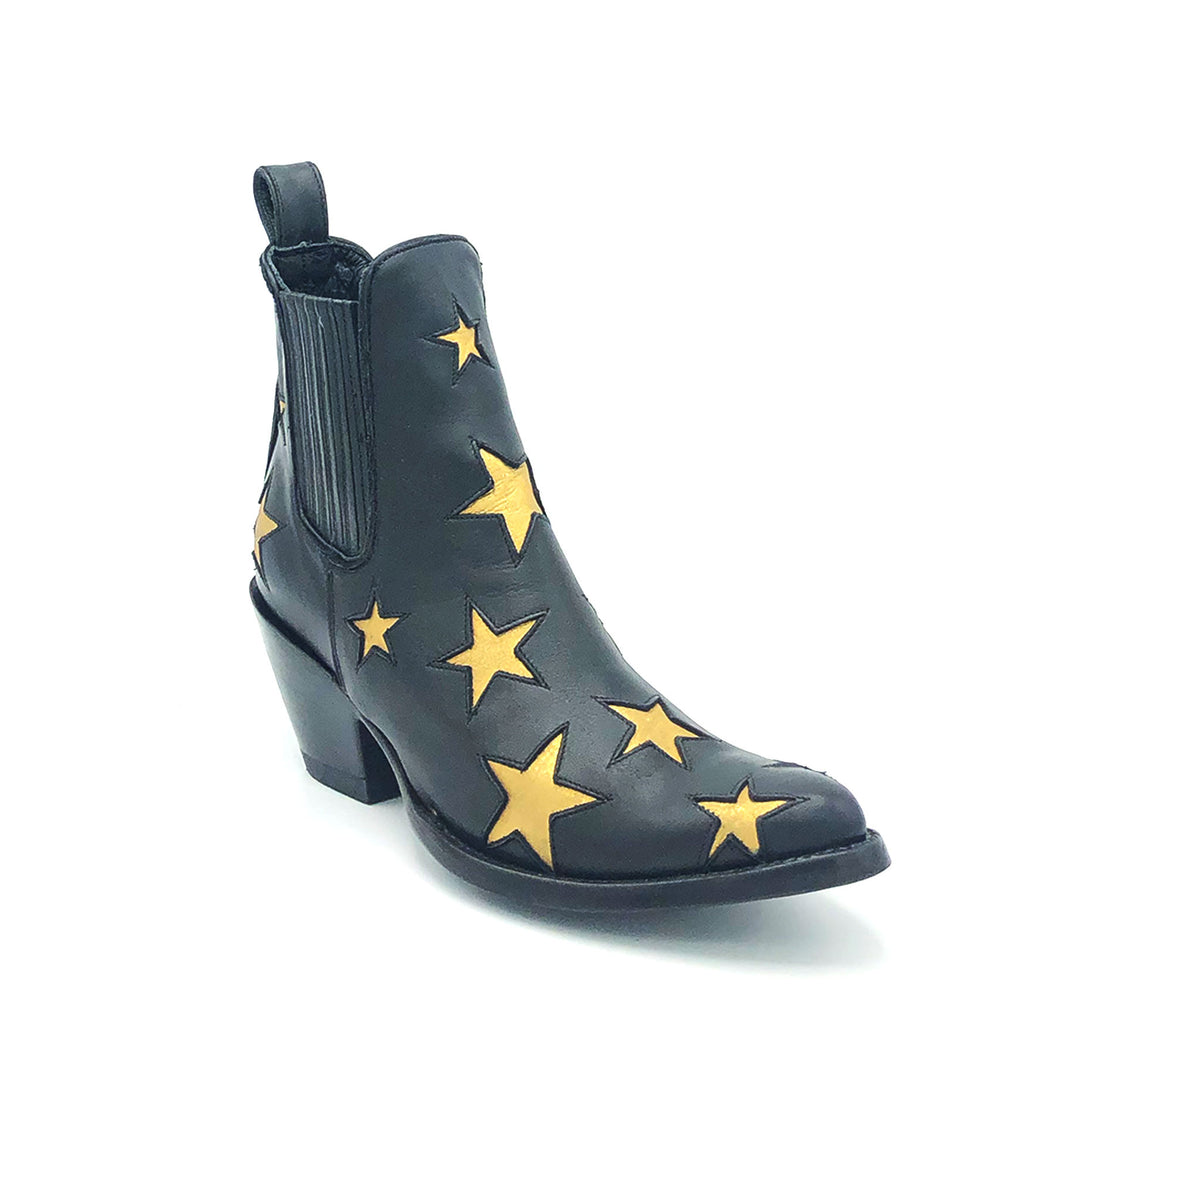 boots with stars on them